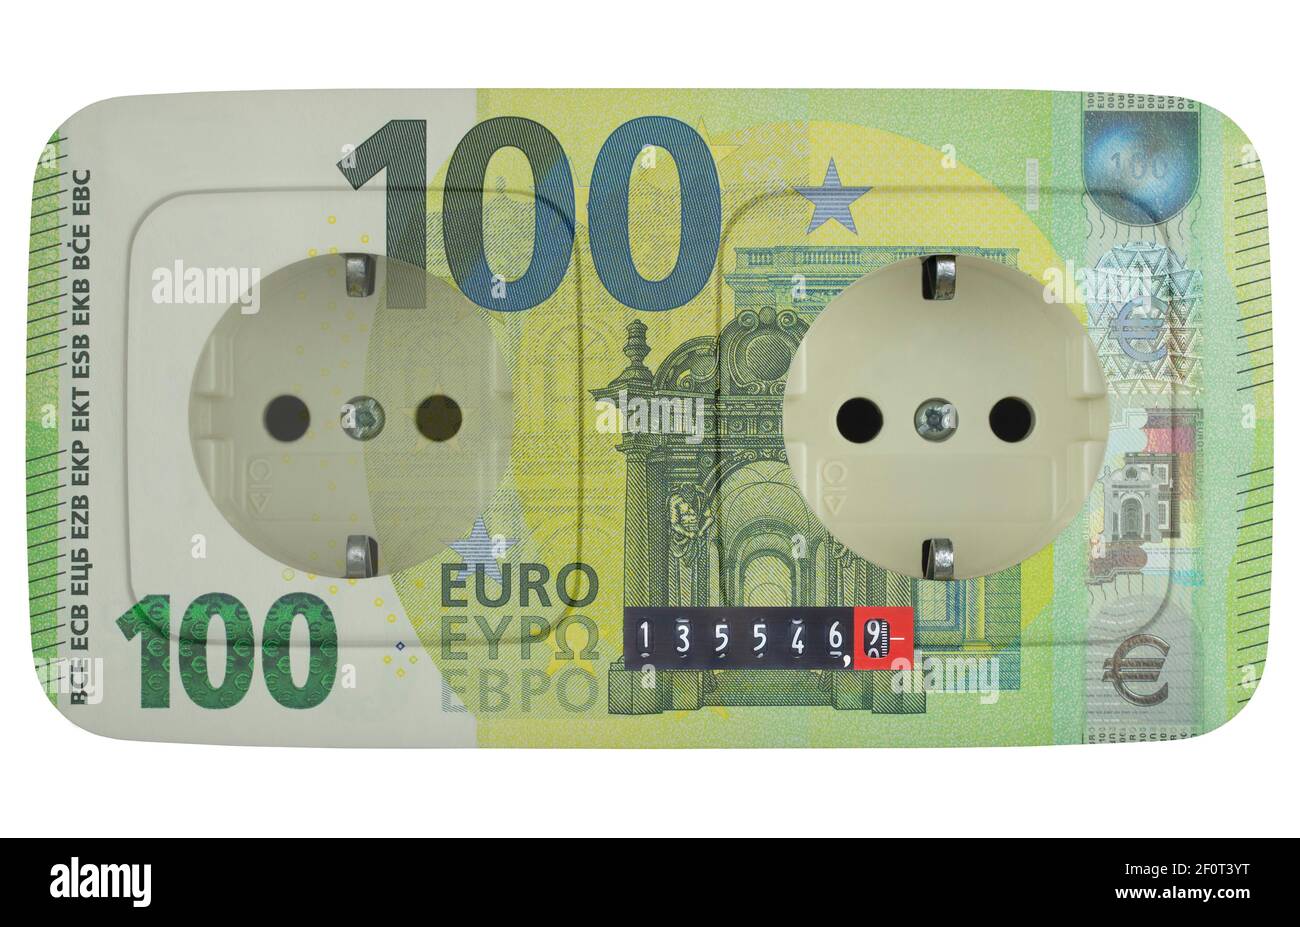 100 euro note Cut Out Stock Images & Pictures - Alamy